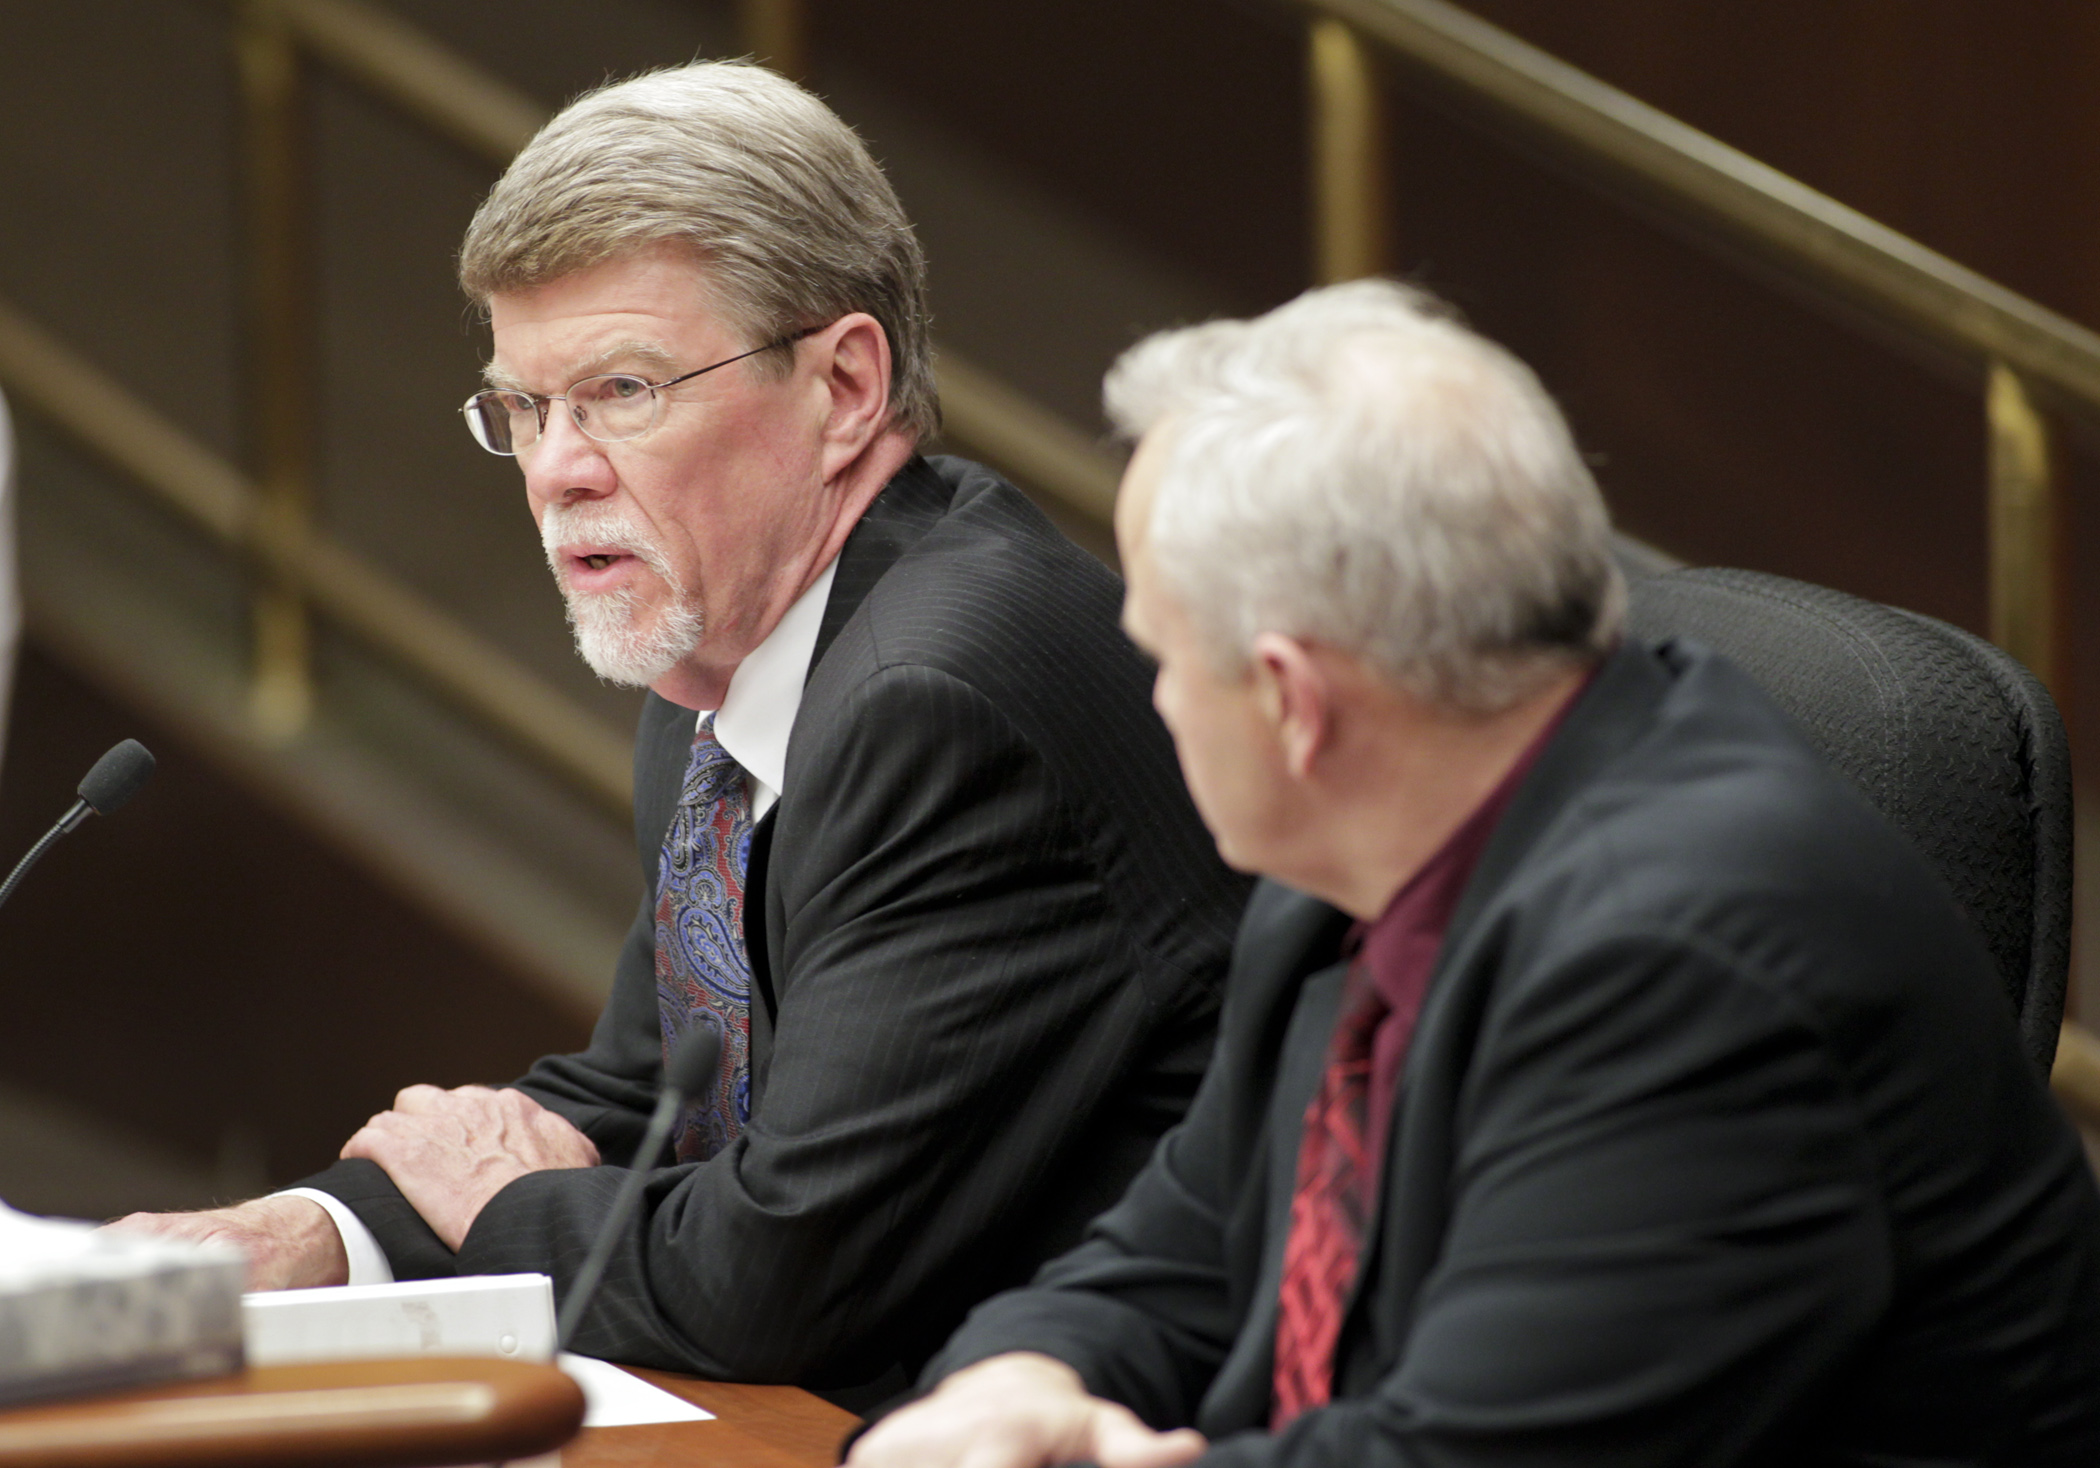 Legislative Auditor Jim Nobles, left, answers a members question during testimony on HF462, sponsored by Rep. Steve Green, right, which would modify the eligibility for Legacy fund appropriations. Photo by Paul Battaglia